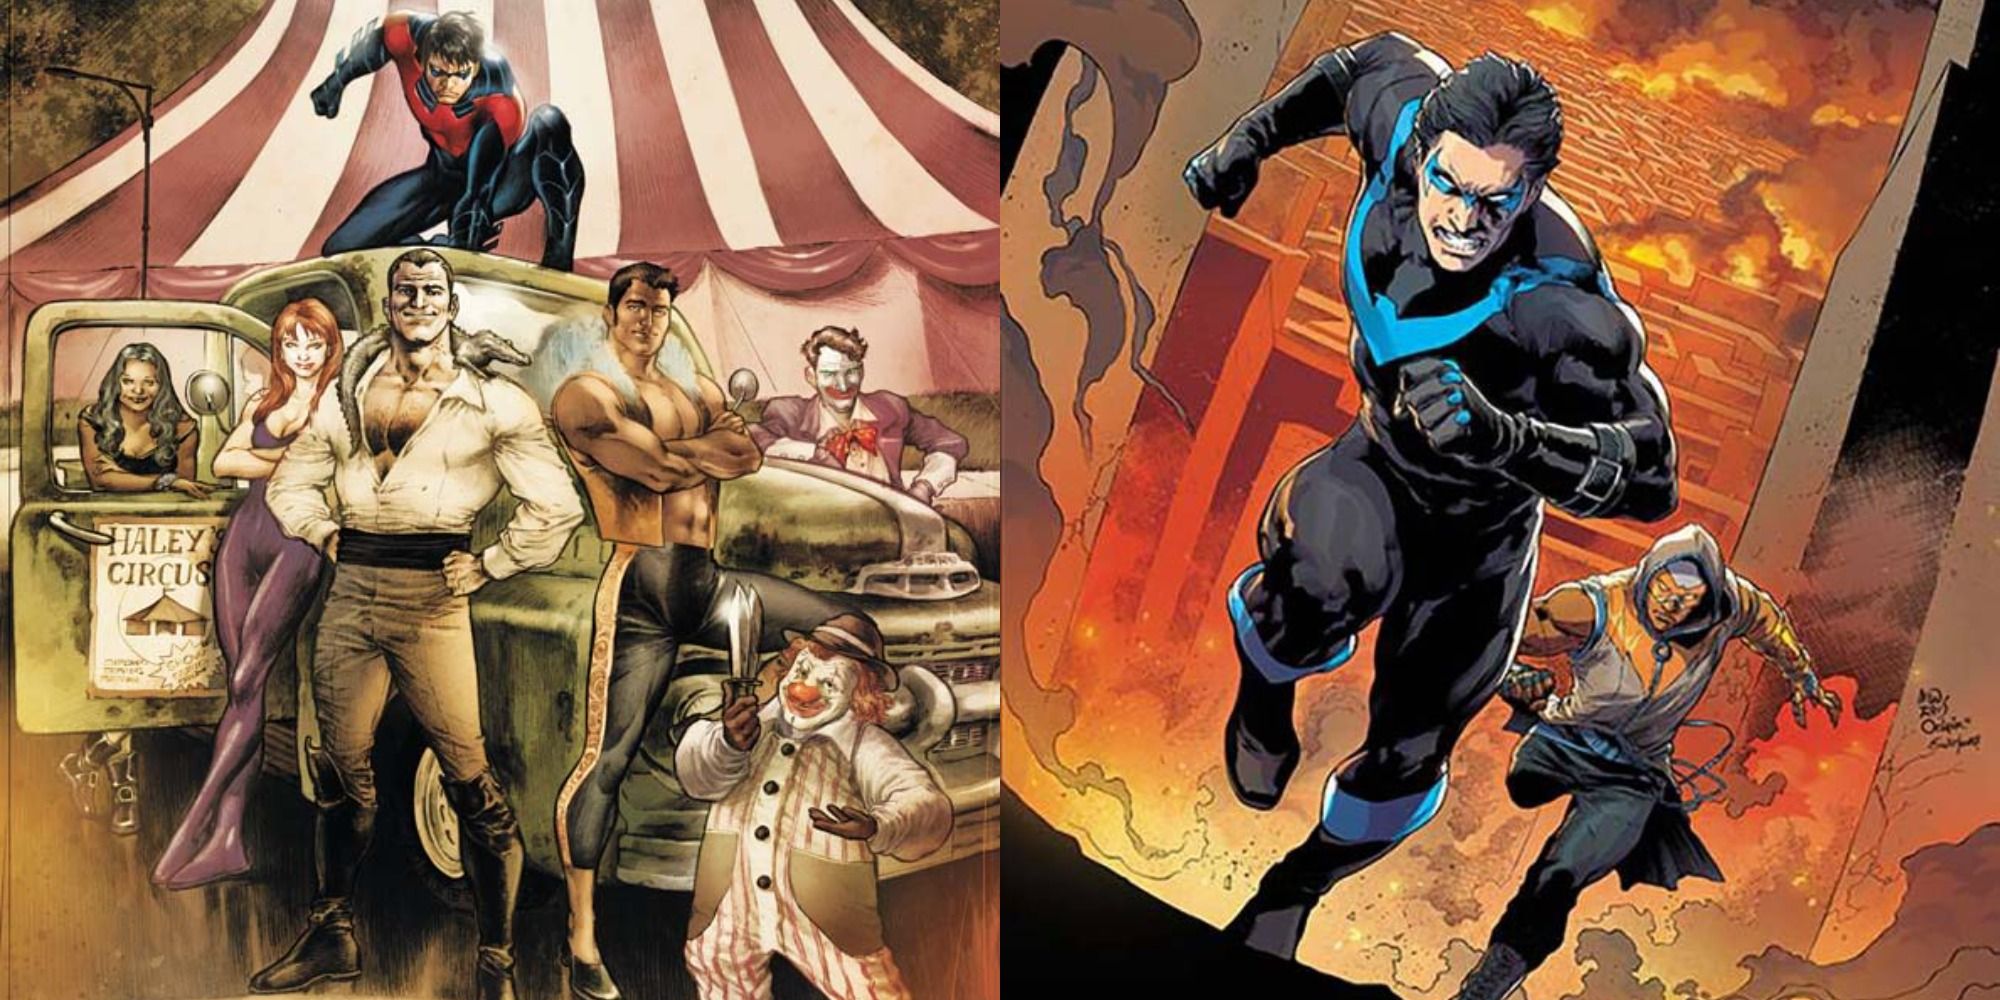 Split image of the Haly circus troupe and Nightwing with Raptor in DC comics